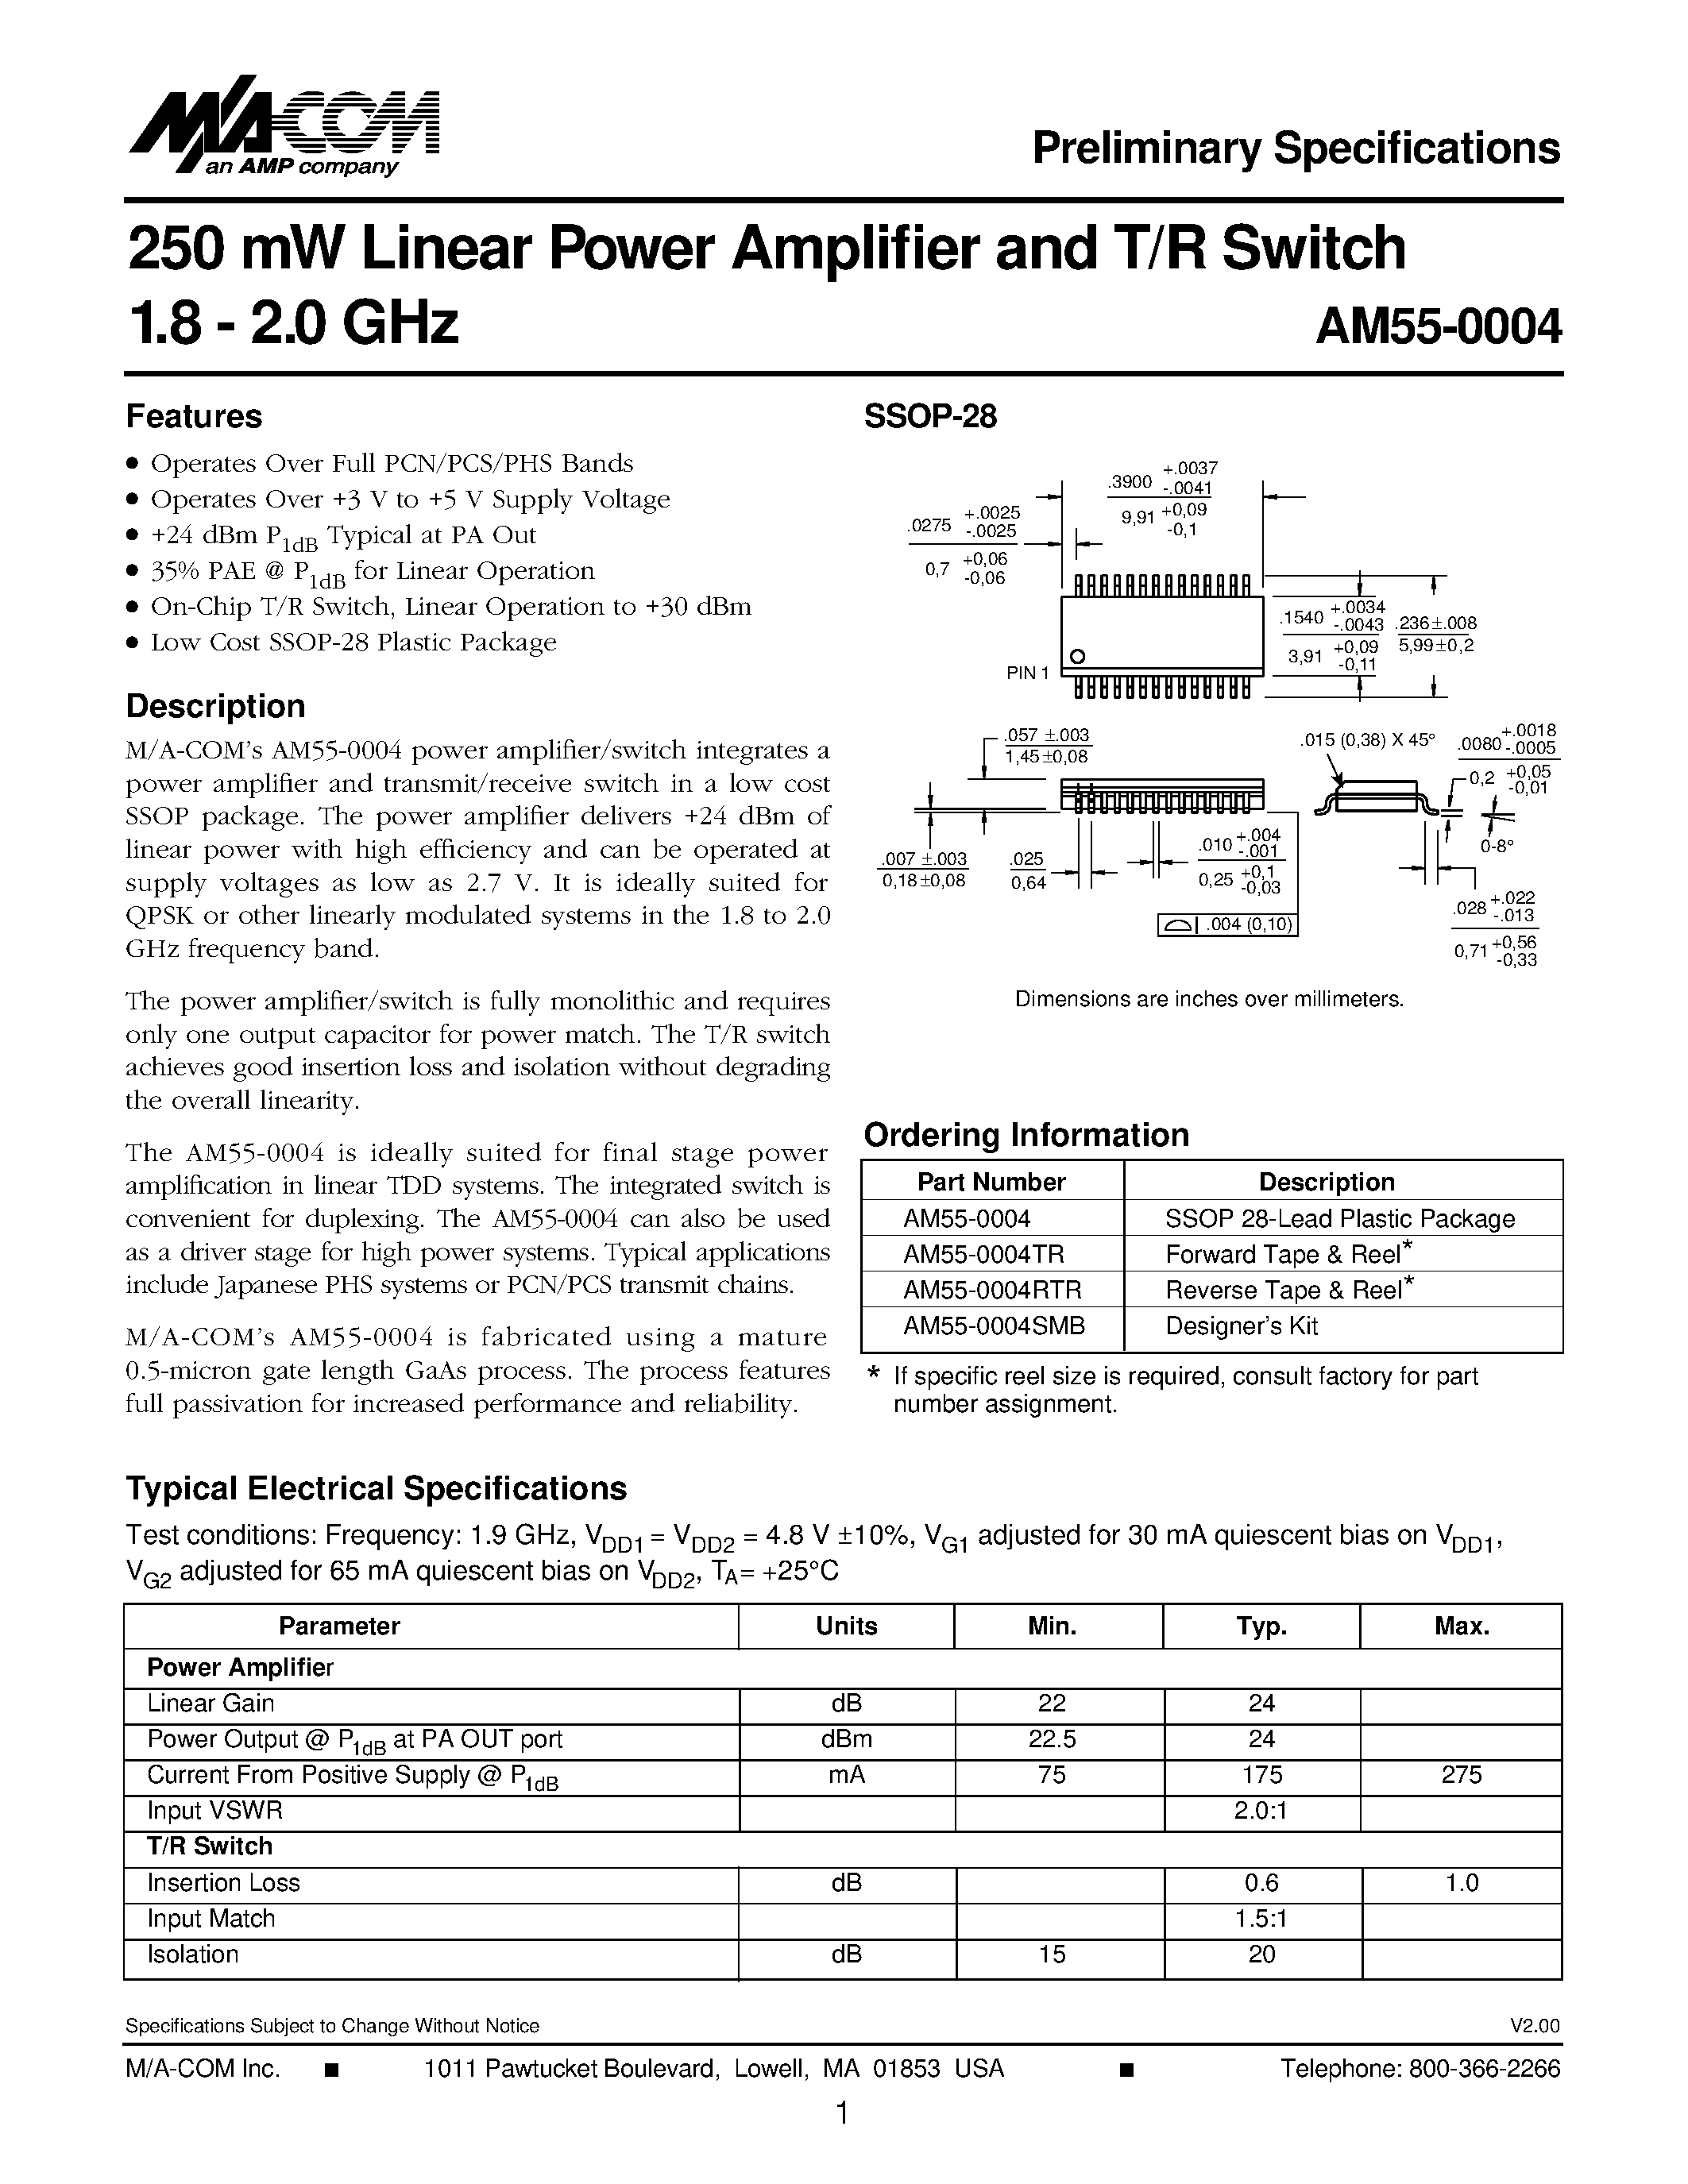 Datasheet AM55-0004 - 250 mW Linear Power Amplifier and T/R Switch 1.8 - 2.0 GHz page 1